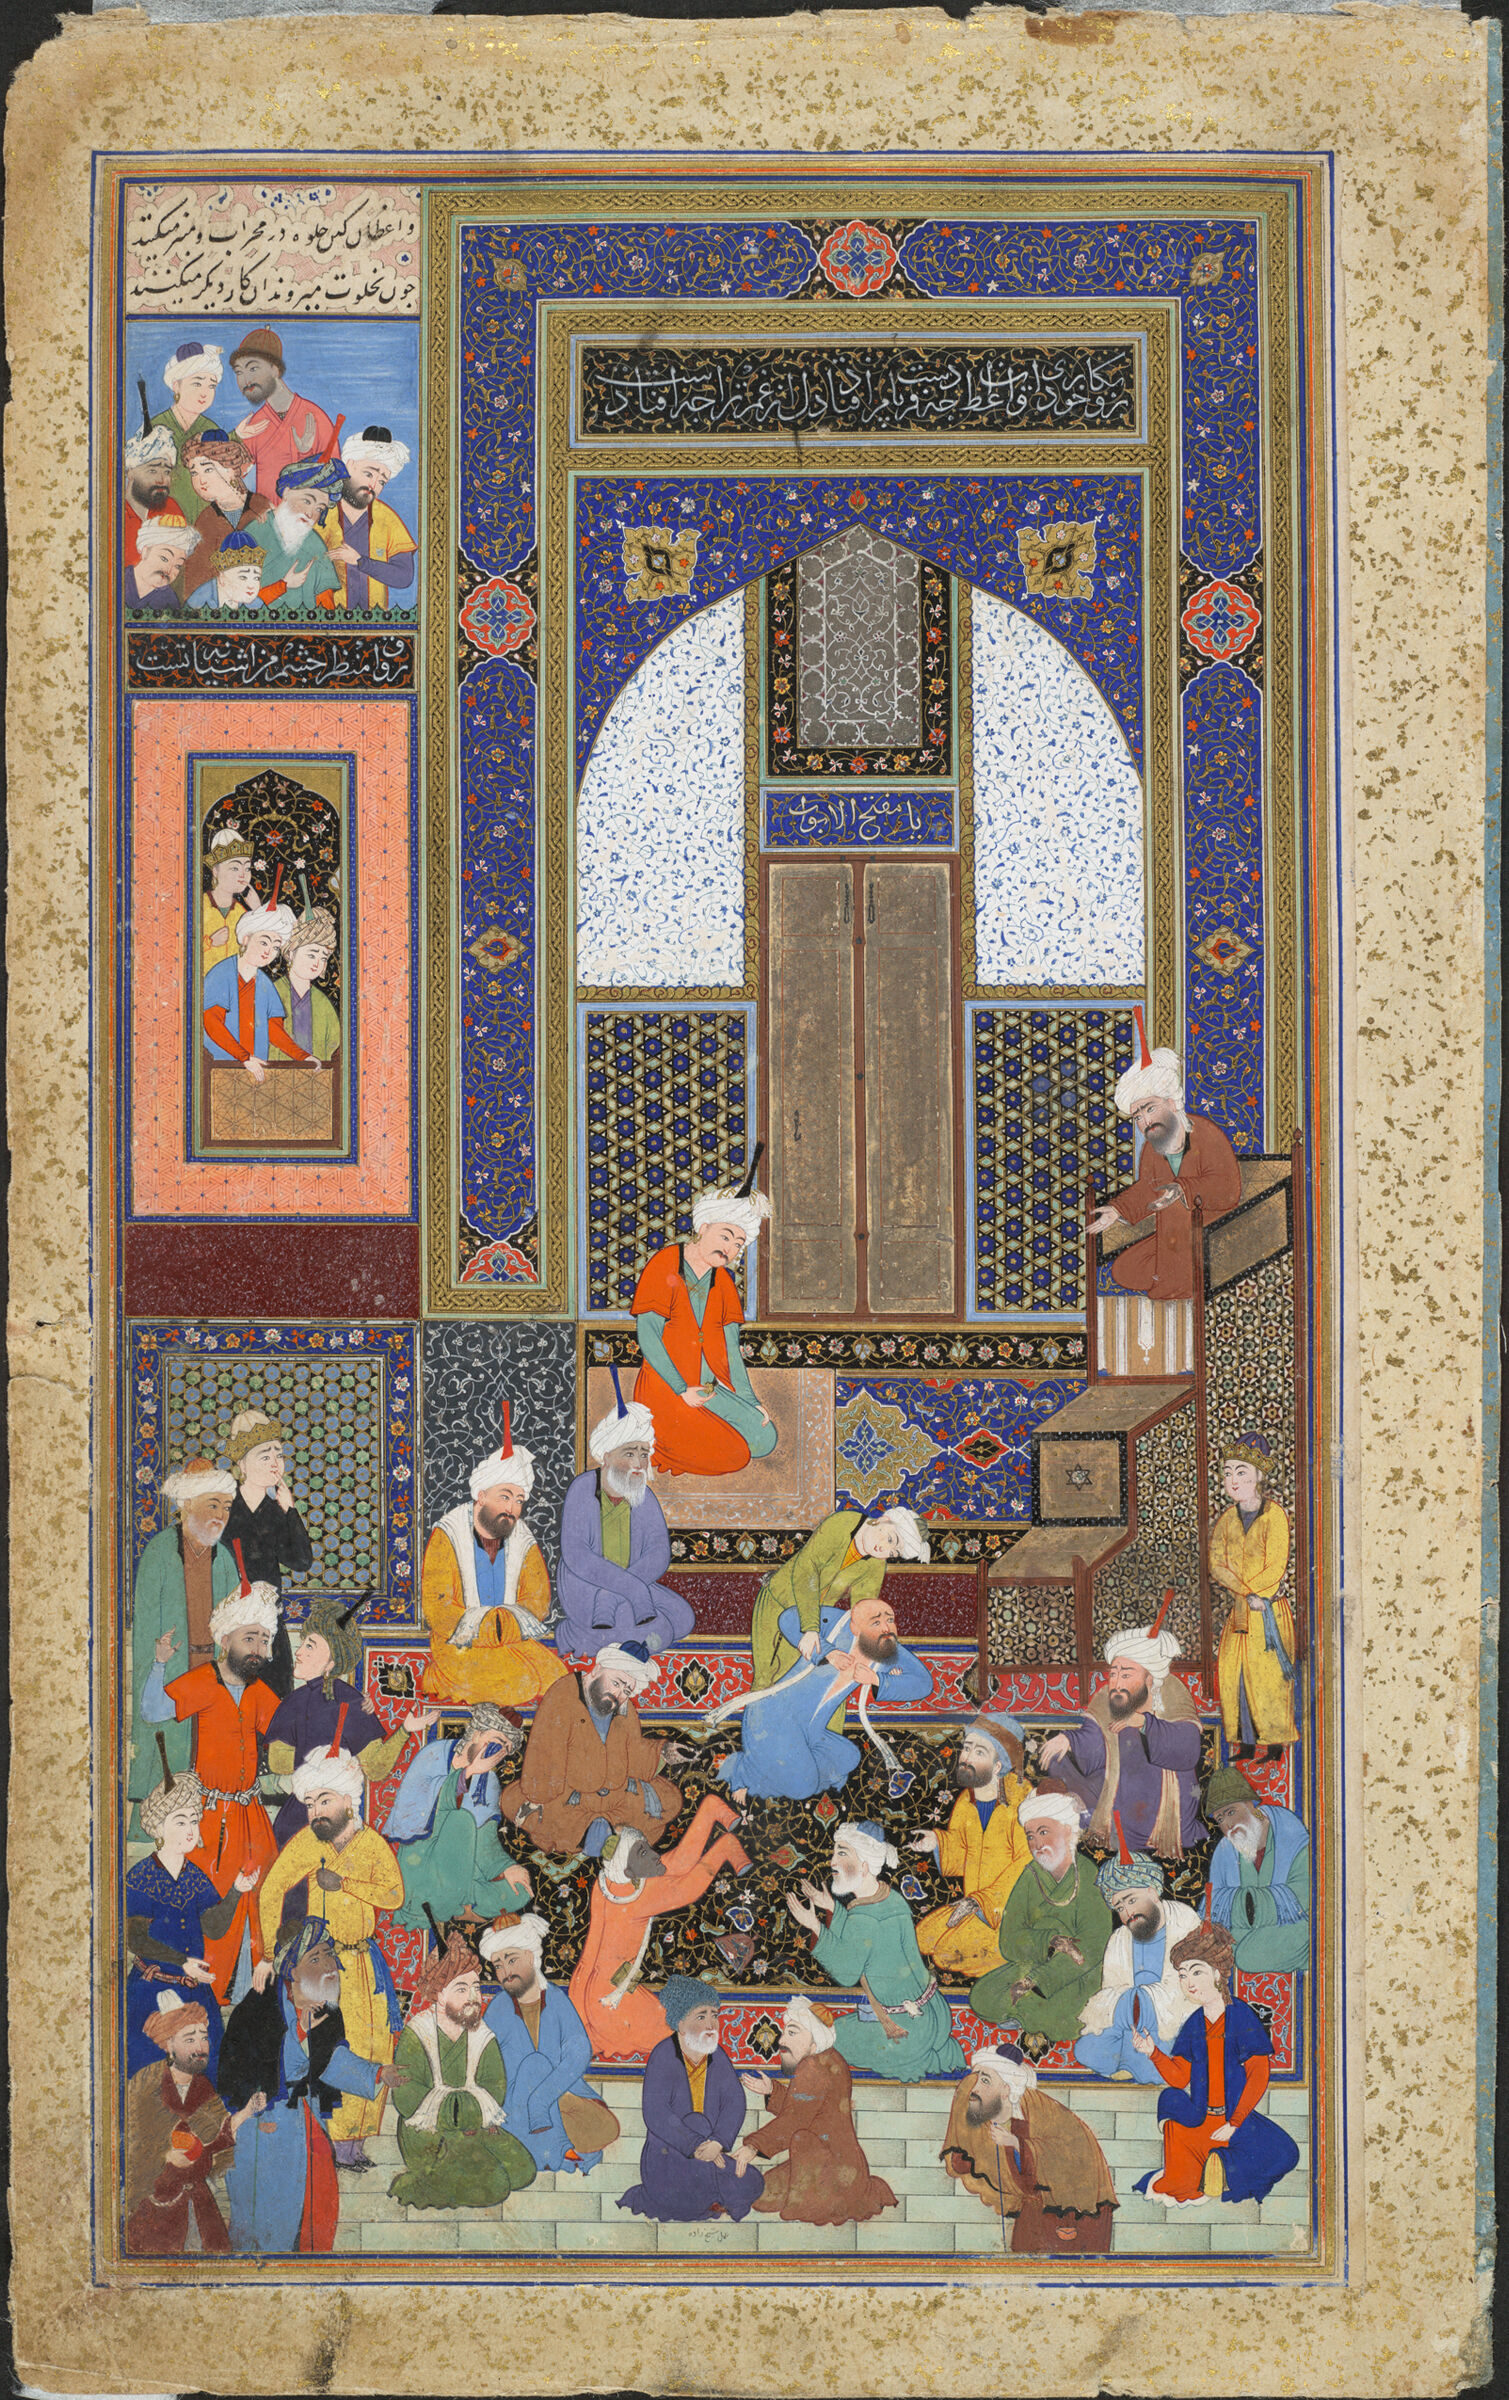 Incident In A Mosque (Painting, Recto; Text, Verso), Folio 77R From A Divan (Collected Works) Of Hafiz, Left-Hand Side Of A Double Page.